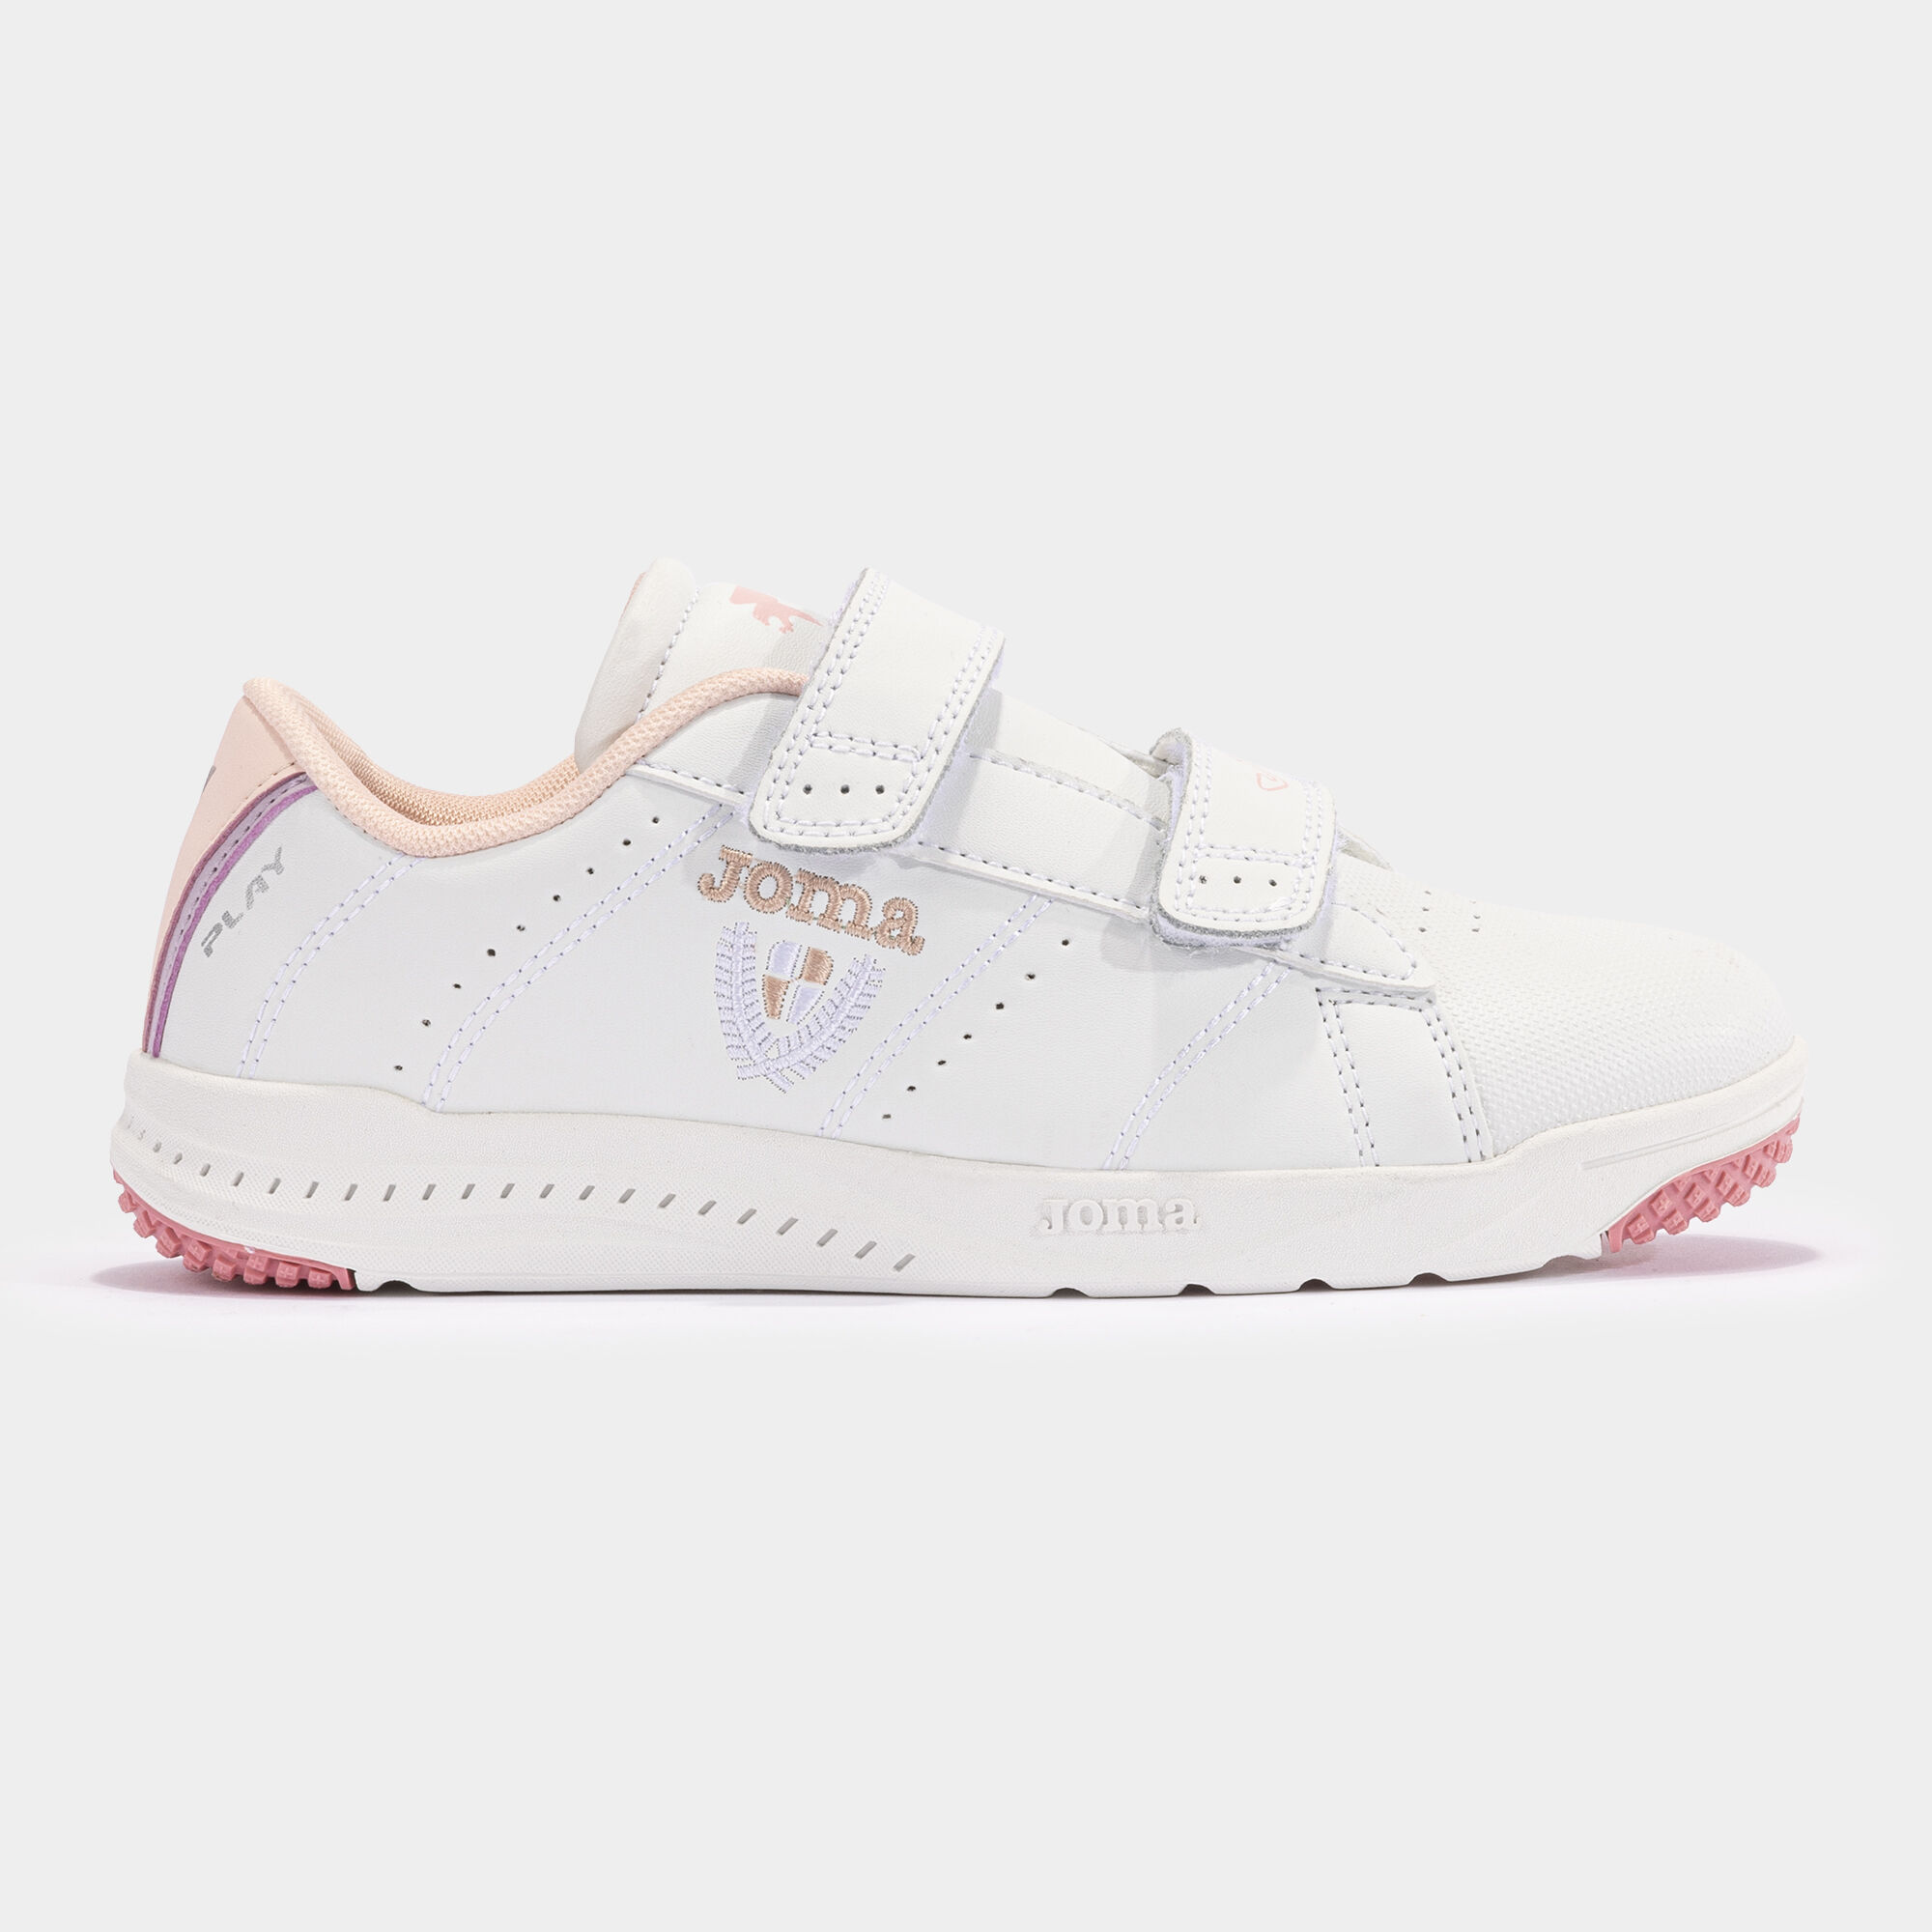 Chaussures casual W.Play Jr 23 junior blanc rose